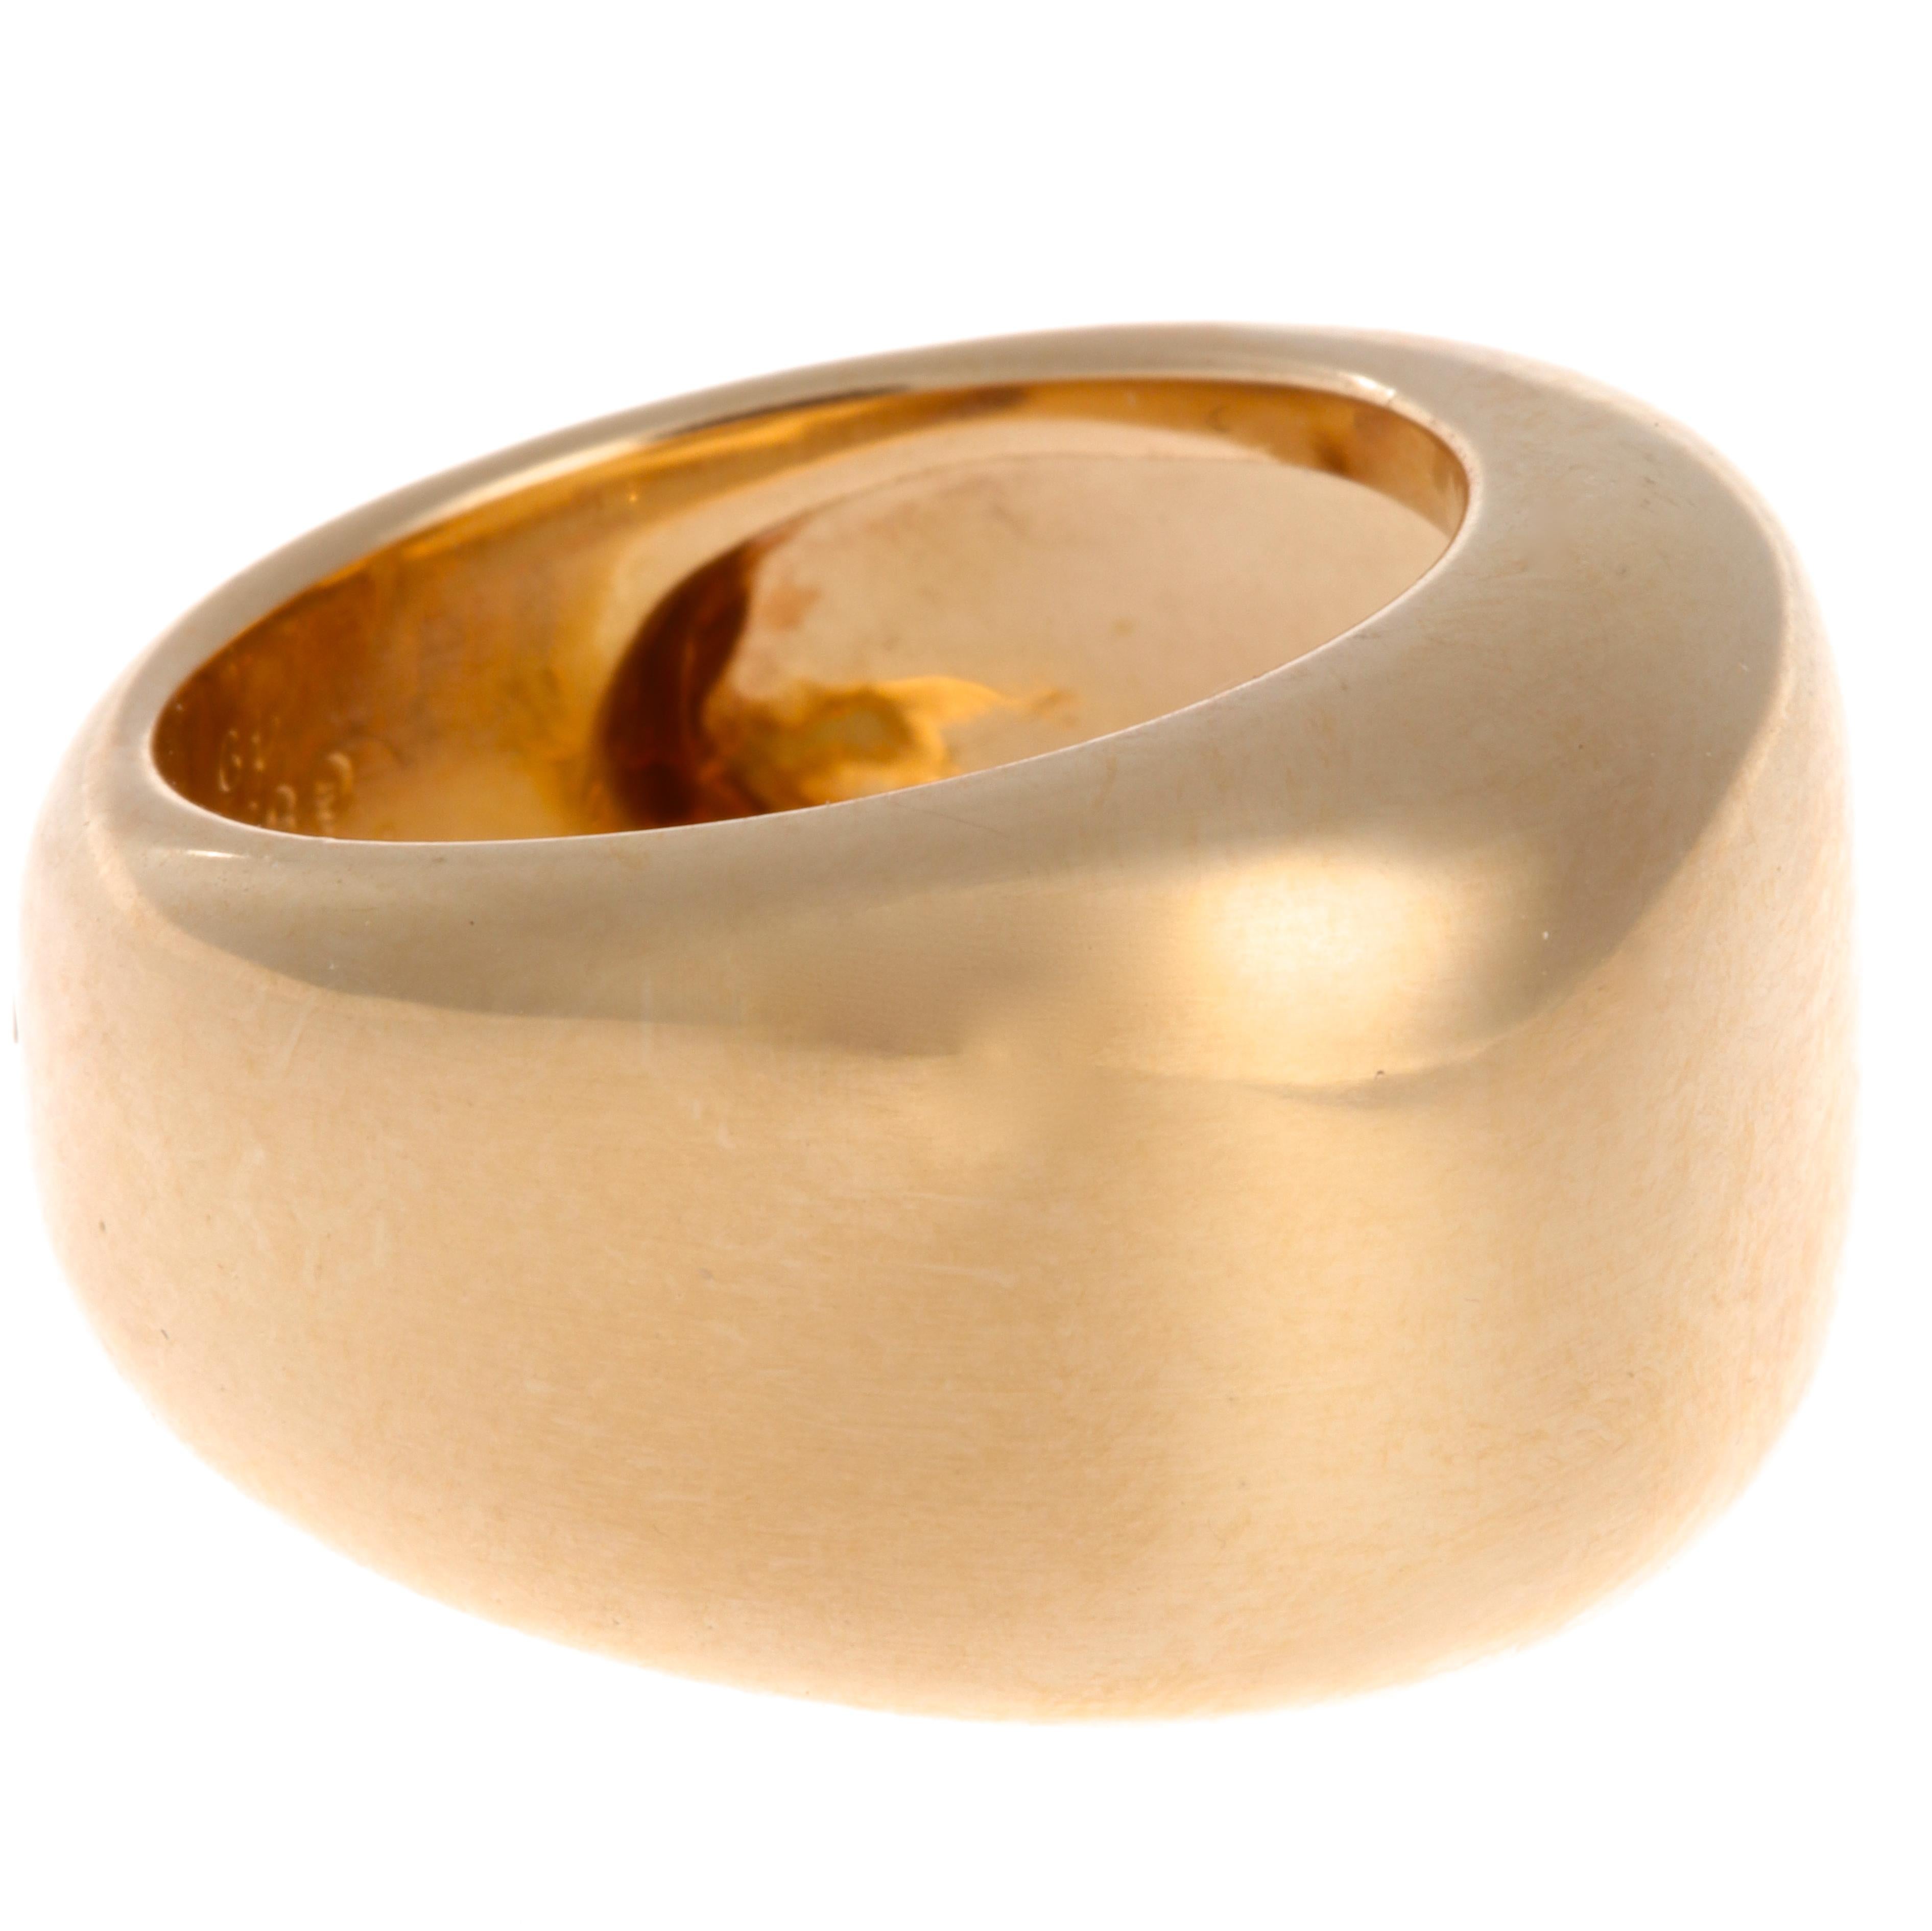 If you like solid gold pieces, this Vintage Cartier Nouvelle Vague Gold Ring is the one! Vintage, substantial gold pieces are a hot trend right now and are a must have. This solid gold ring visually creates an artistic asymmetrical contrast. Signed